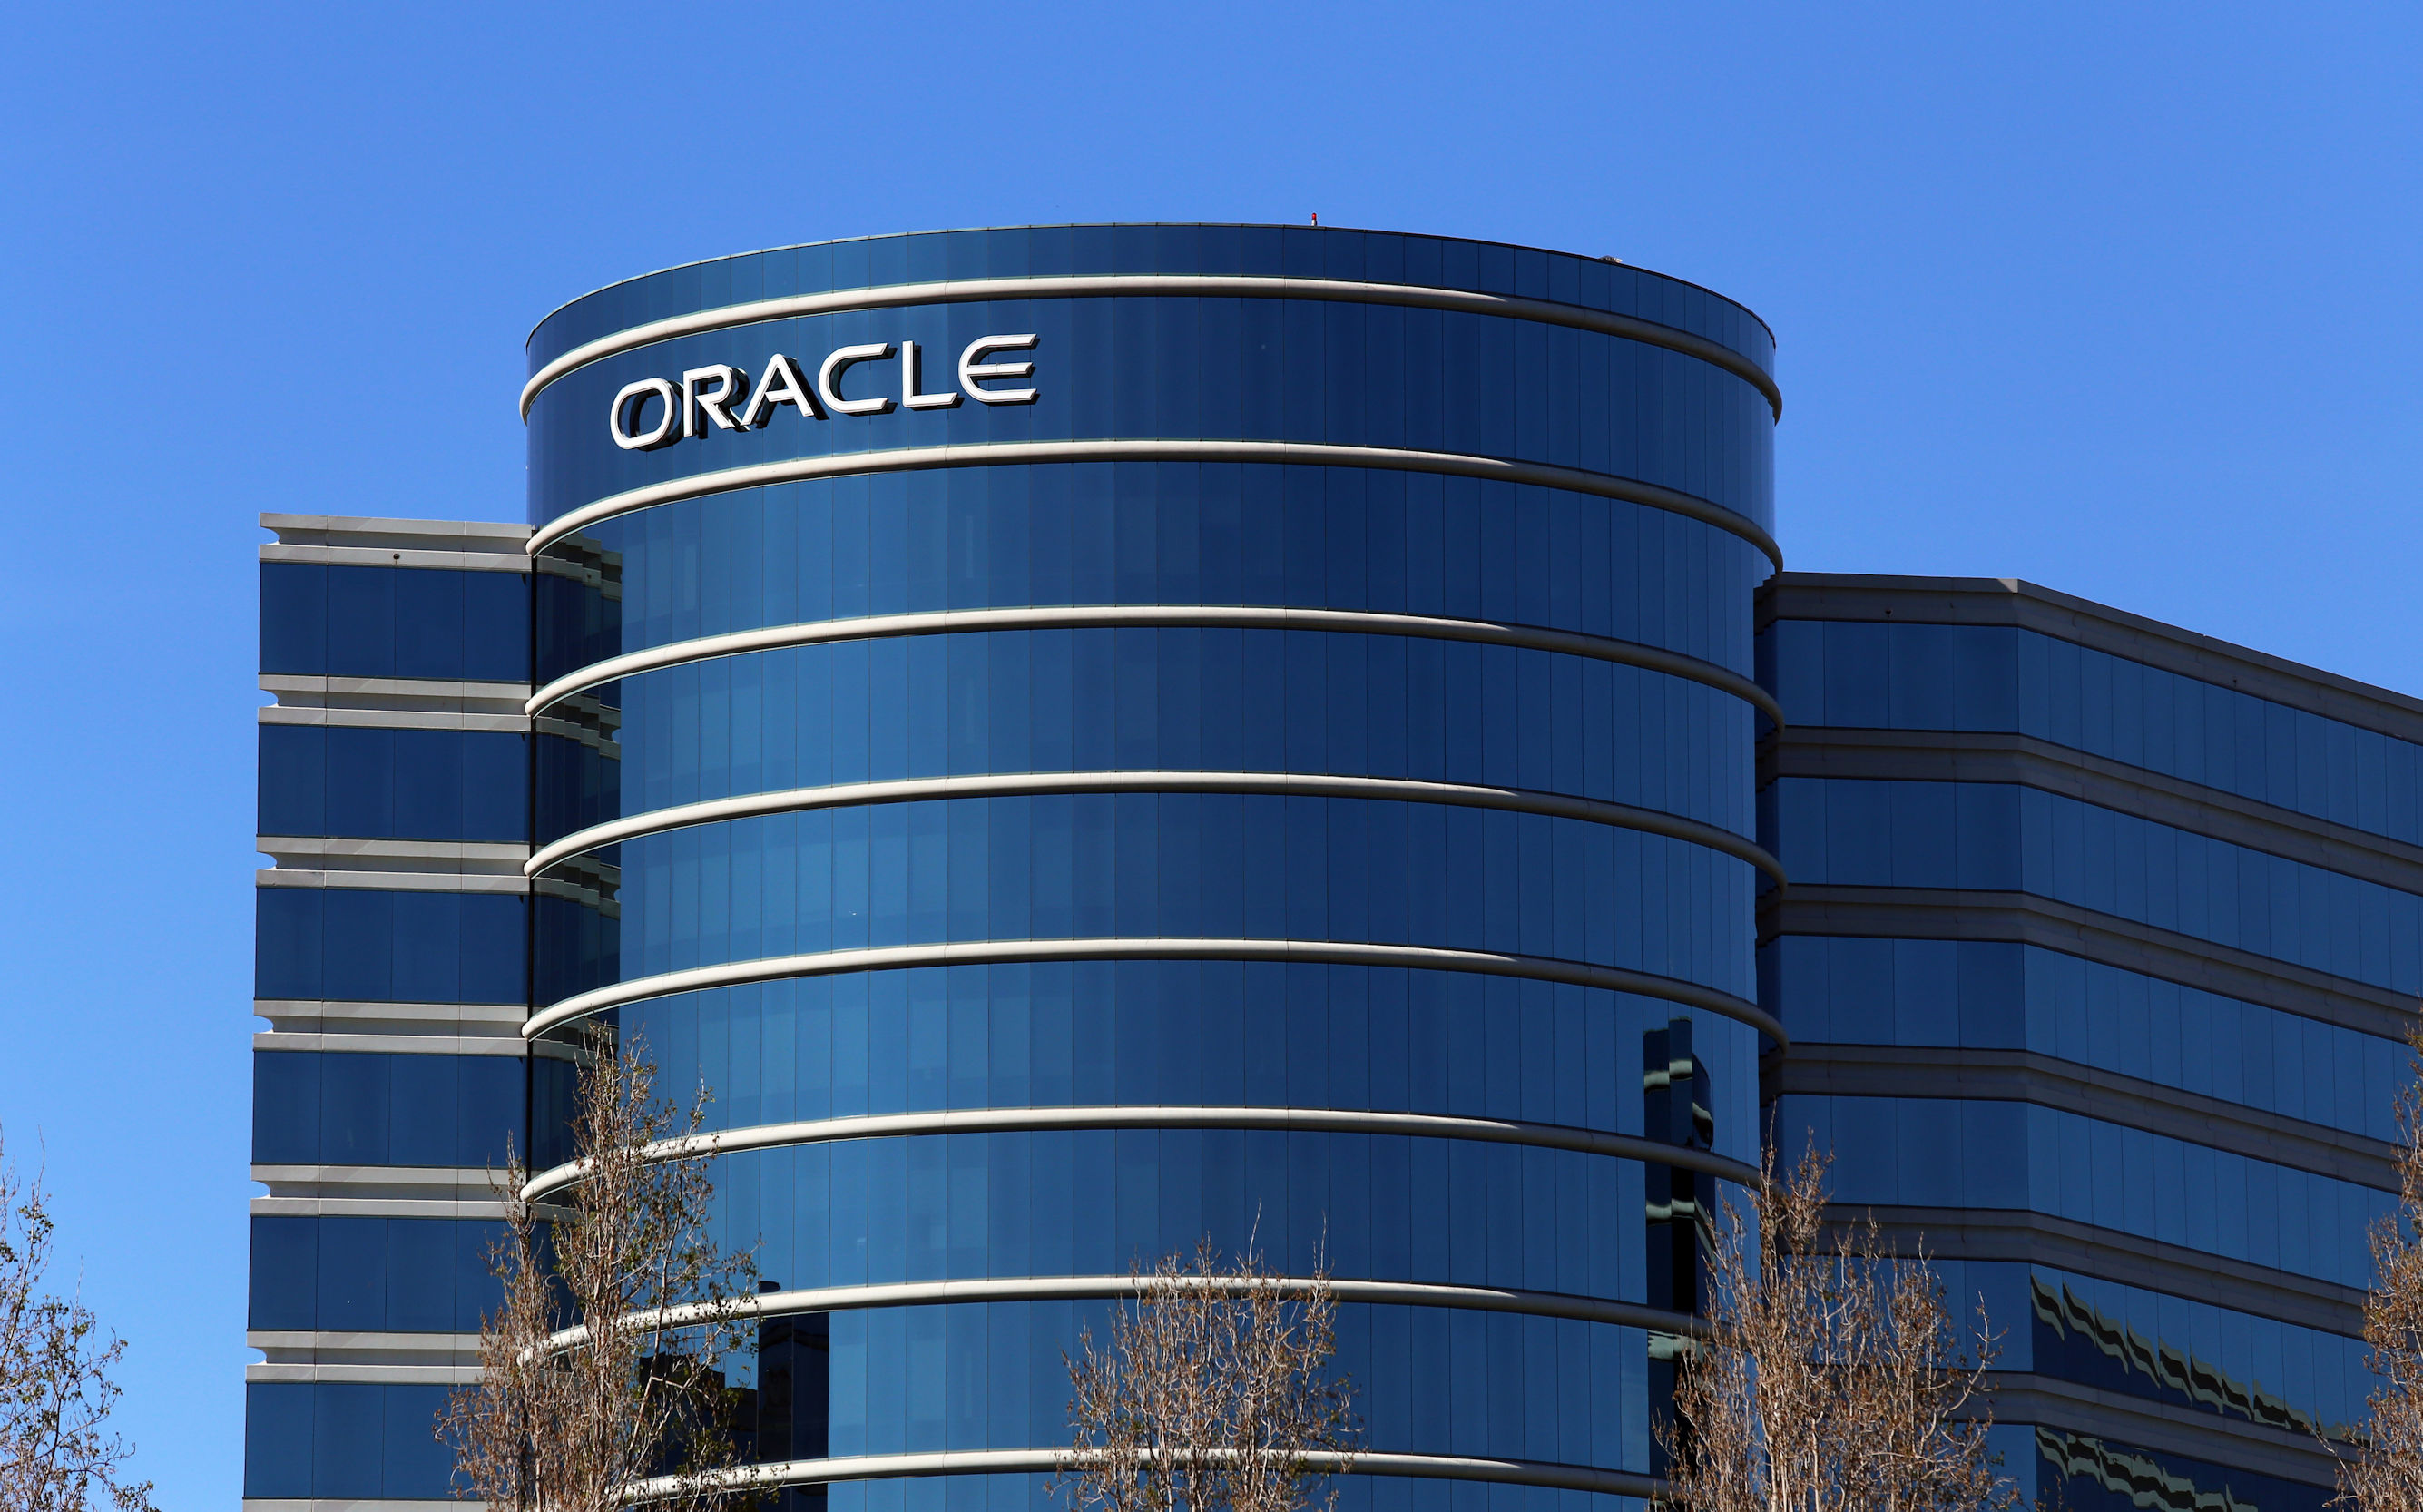 Oracle spokesman on why Egypt is one of the company’s top markets